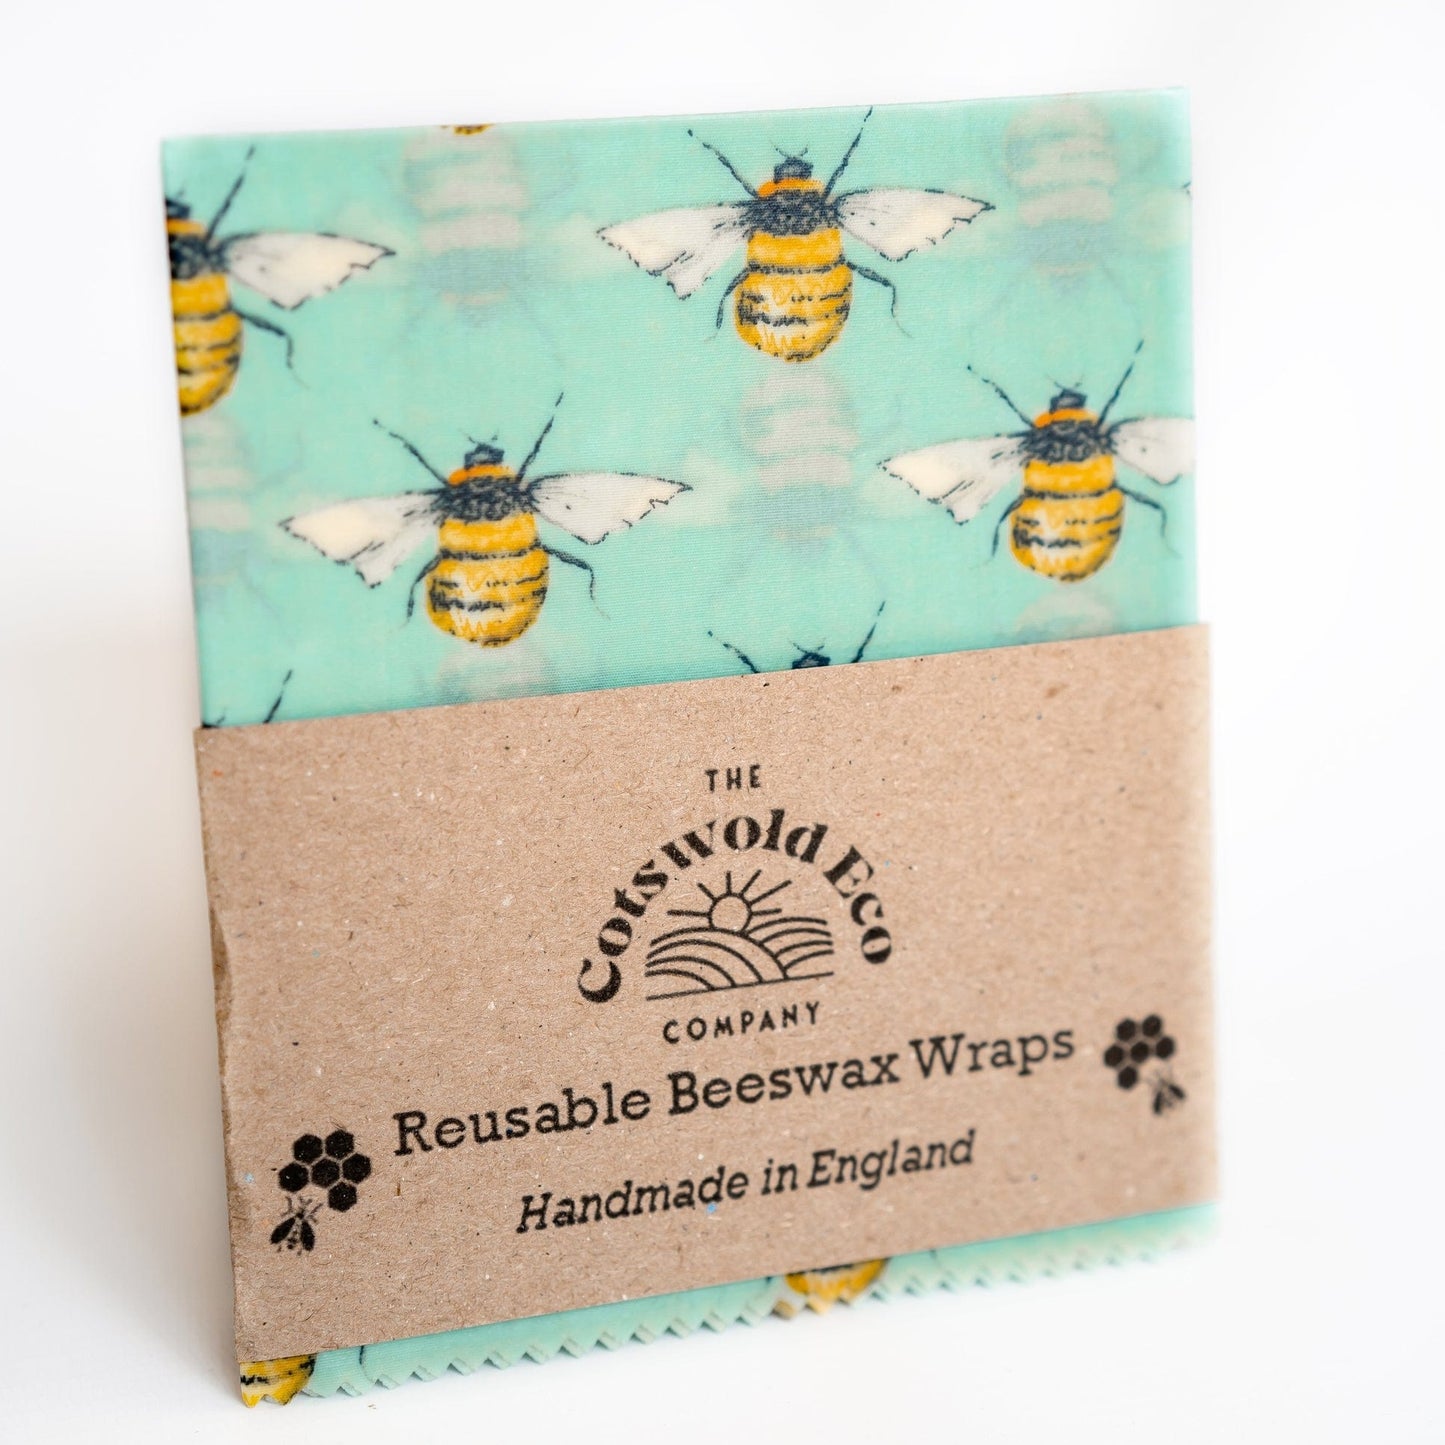 The Cotswold Eco Company Handmade Beeswax Wrap - Mint green and bees